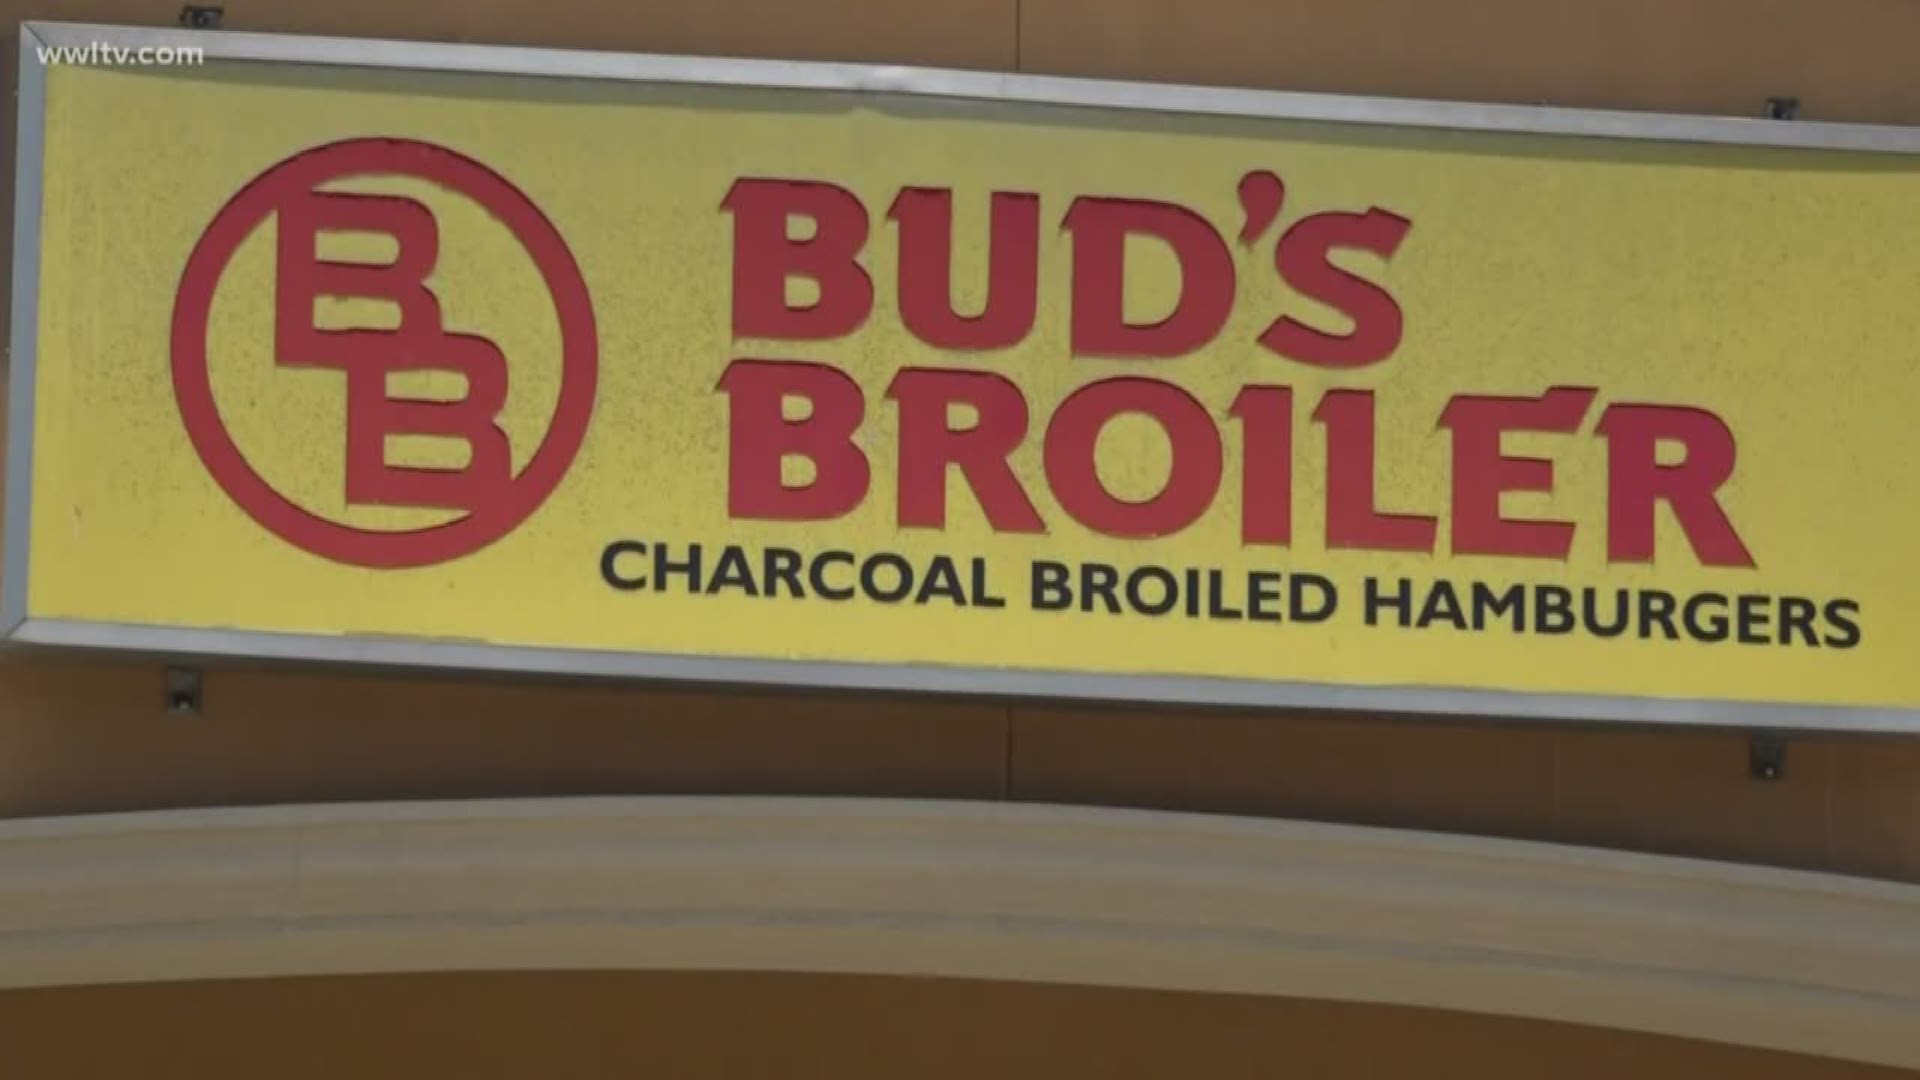 Morning Call and Bud's Broiler will soon open again, side by side, at Canal and City Park.